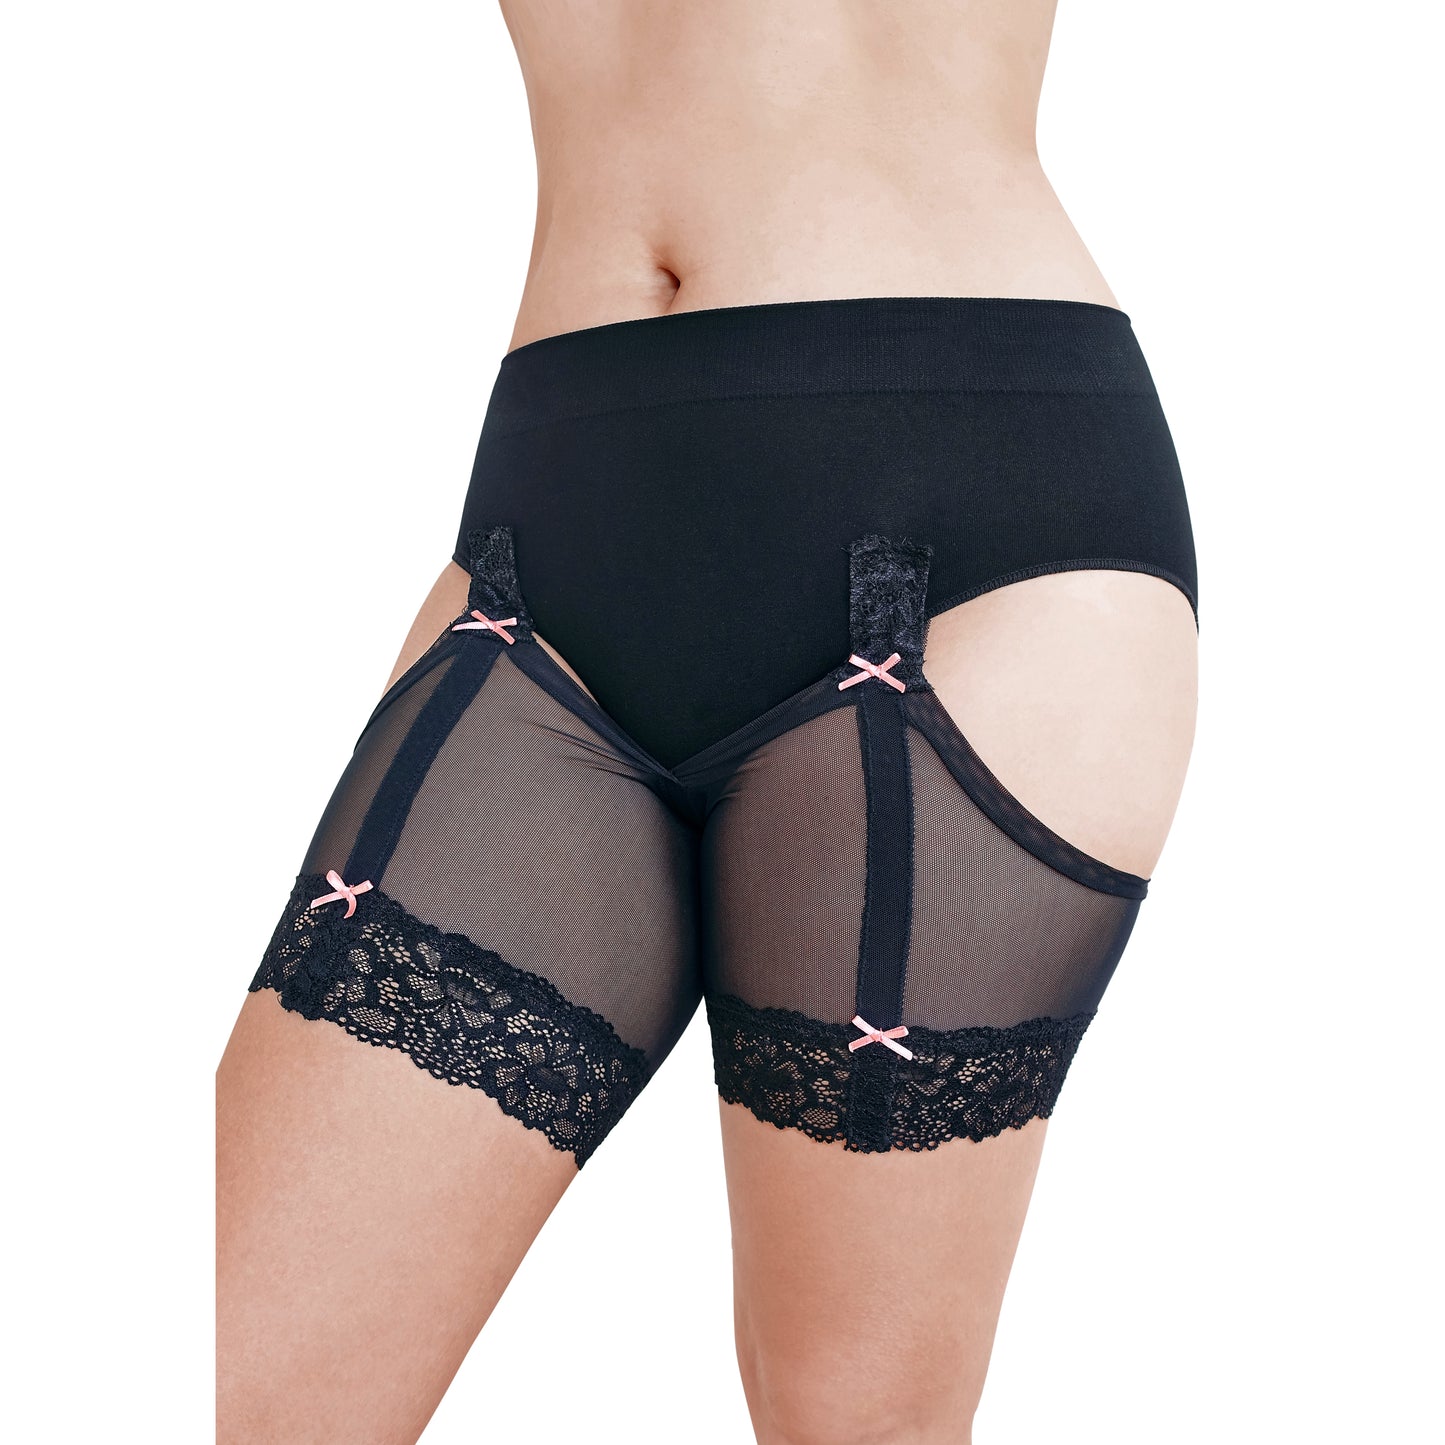 ANTI CHAFE Clip-On Thigh Bands - BLACK w.PINK BOWS